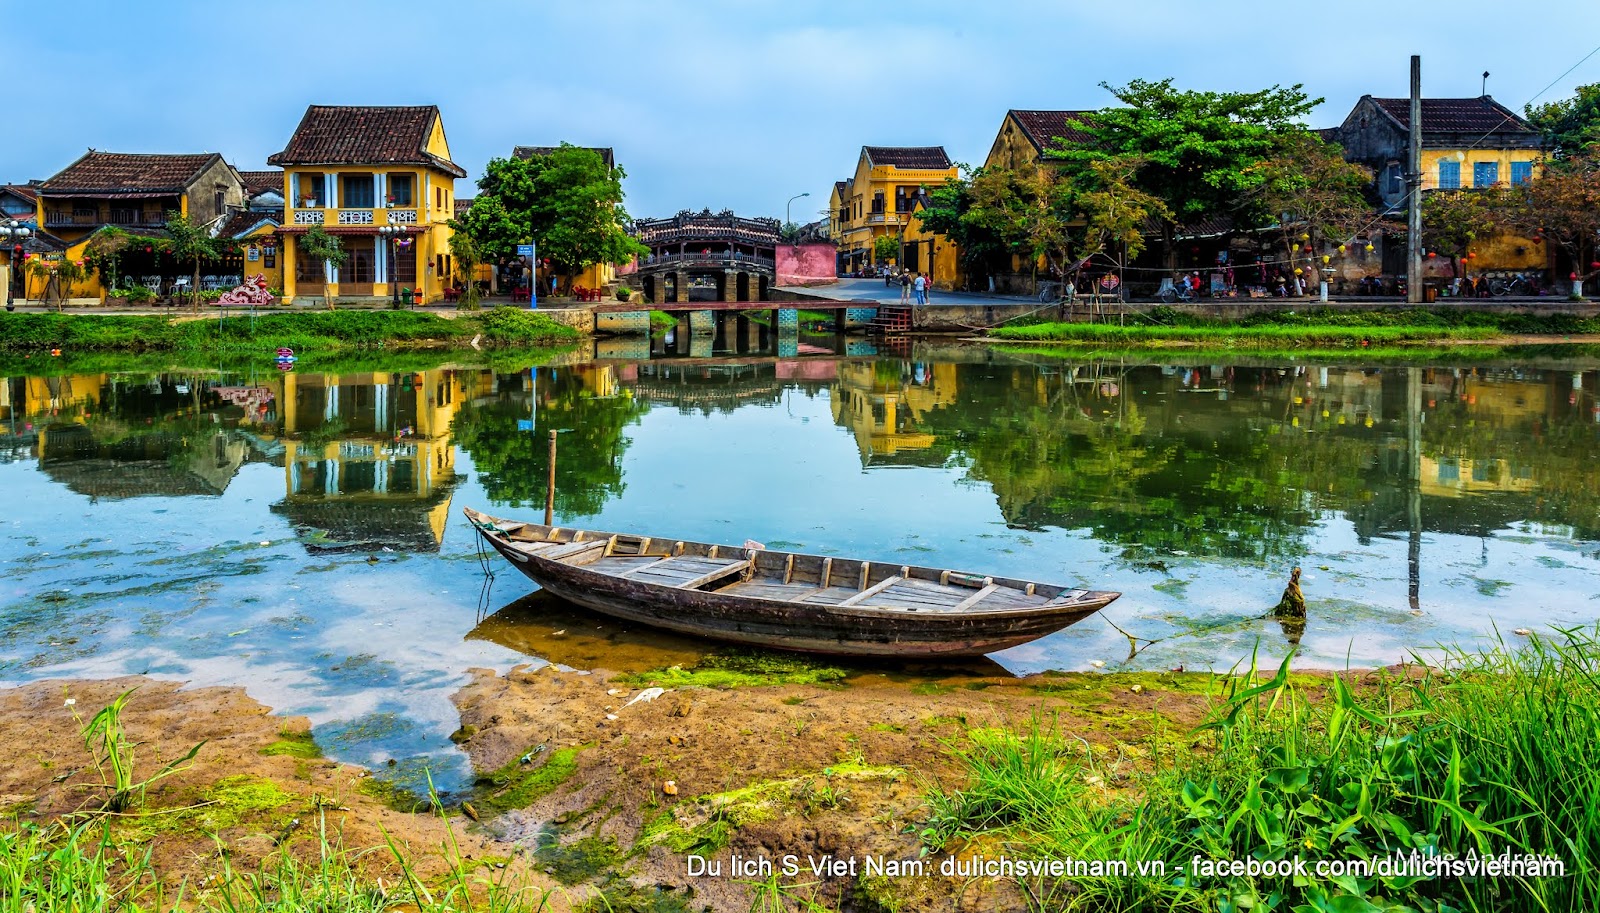 Hoi An Ancient Town - World Cultural Heritage Site By Unesco